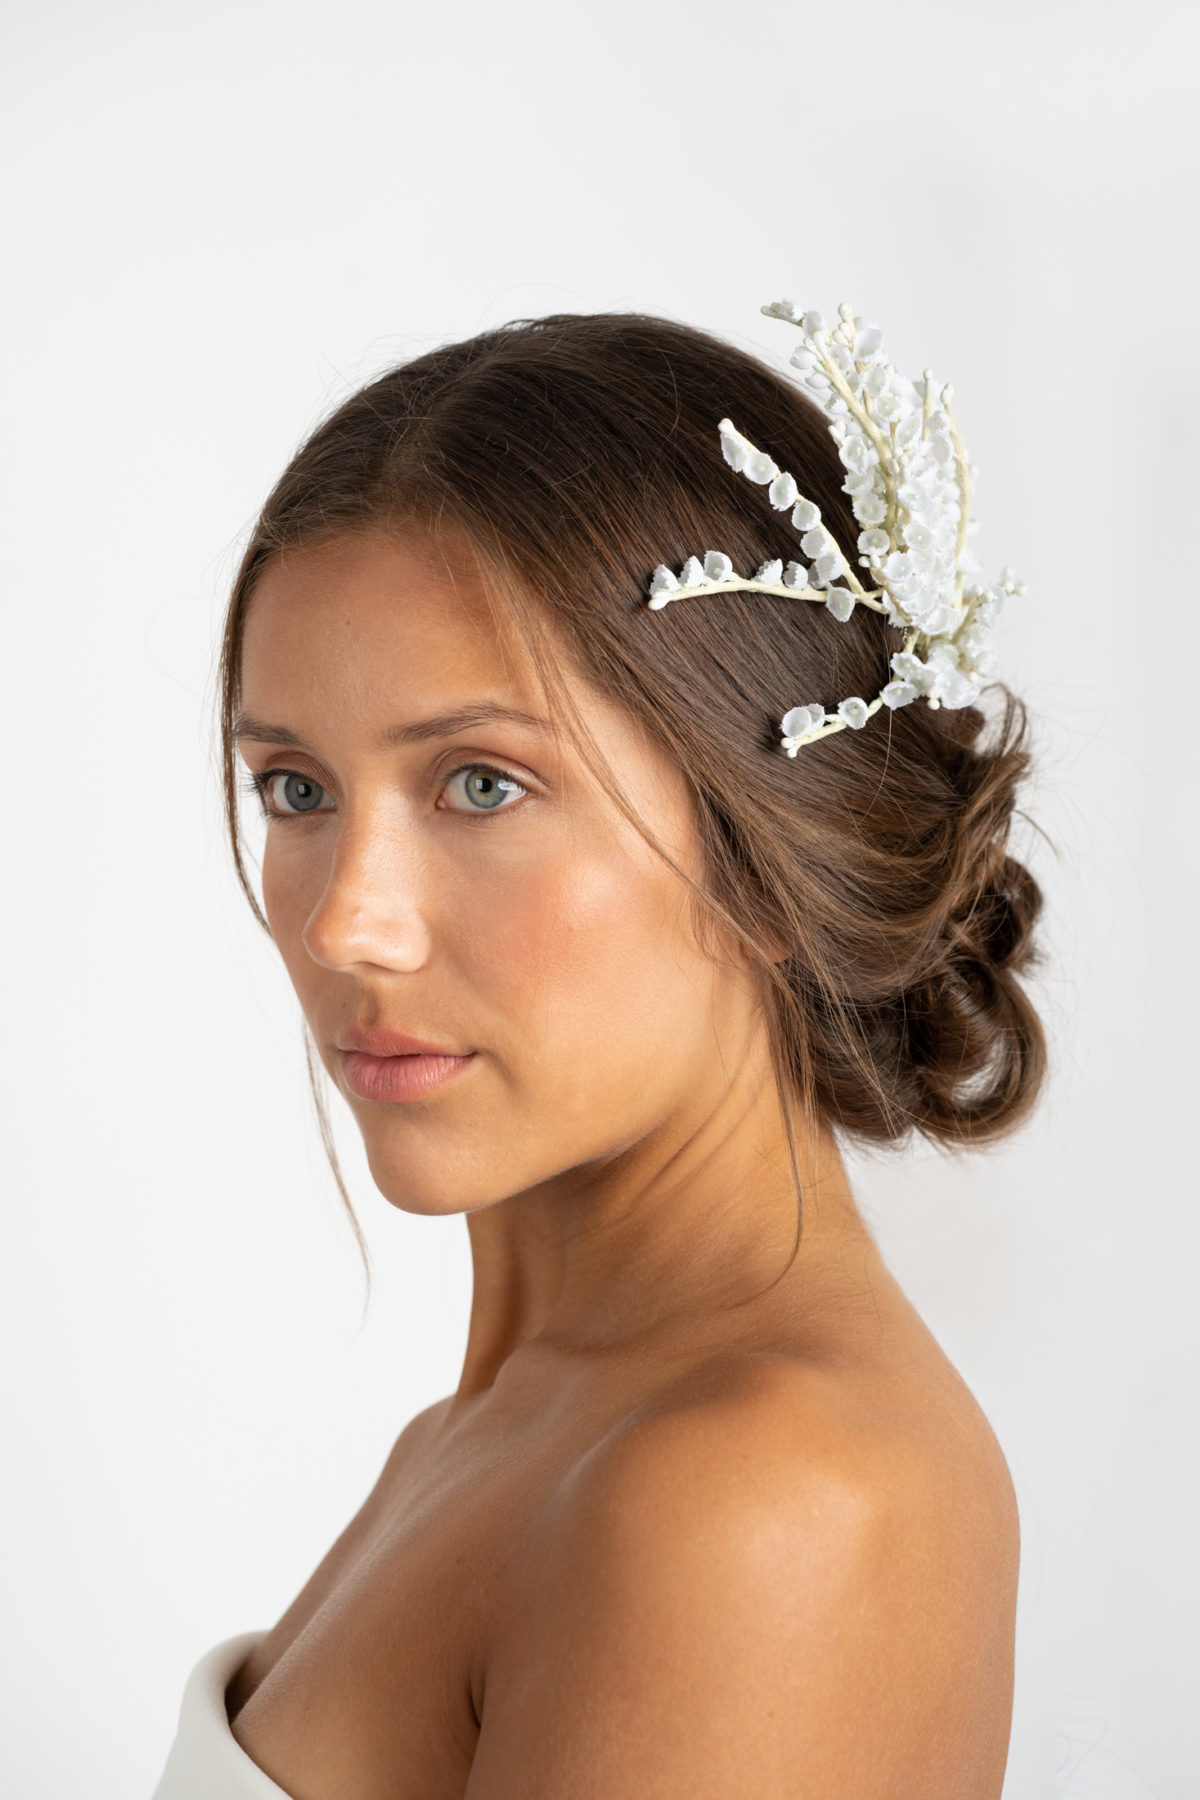 Model on a white background wearing a custom wedding headpiece by Mariee Lace Veils